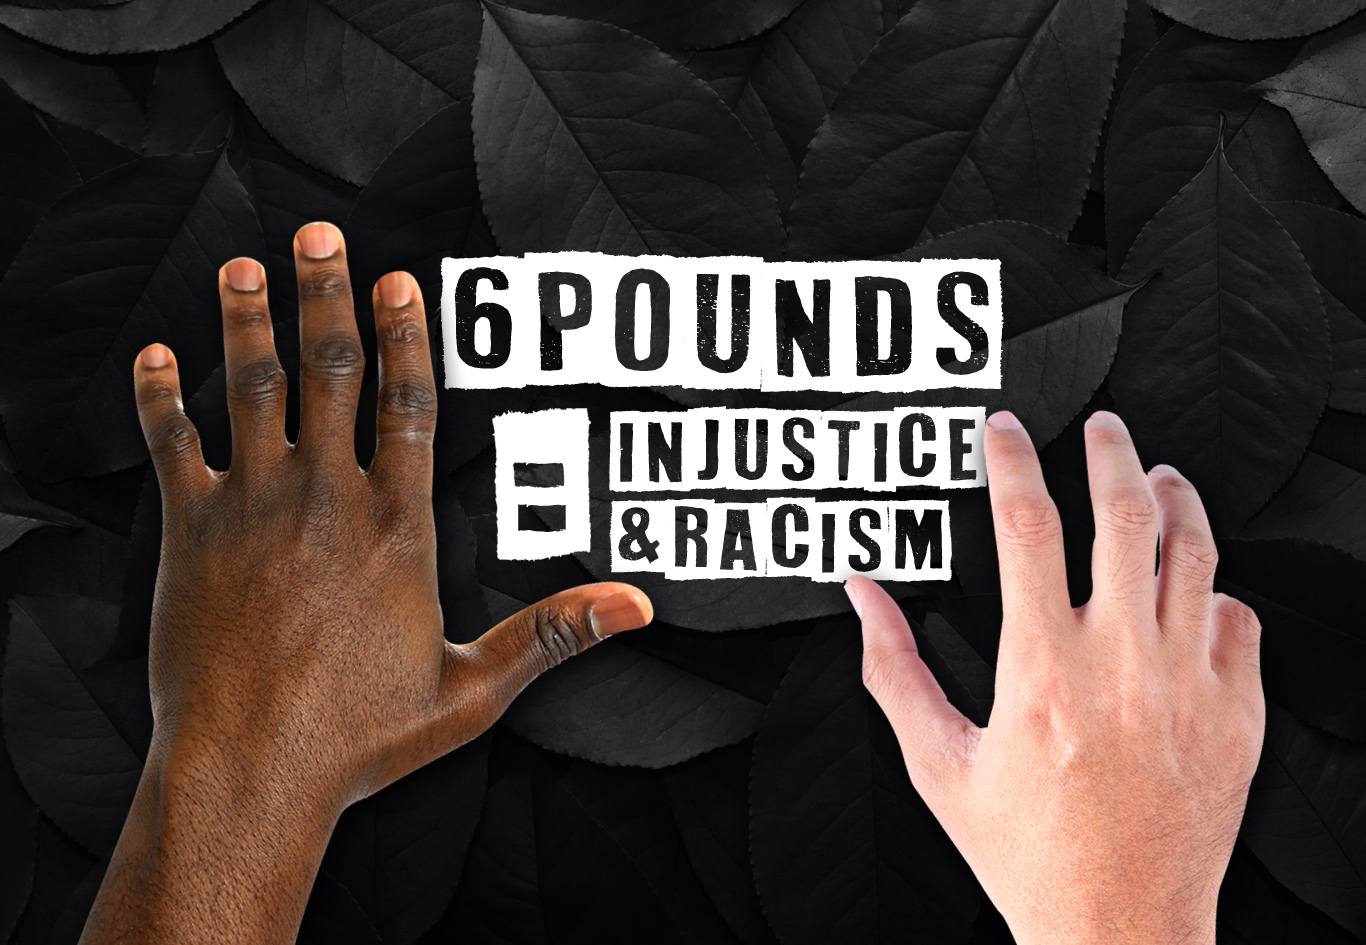 6 Pounds = Injustice & Racism